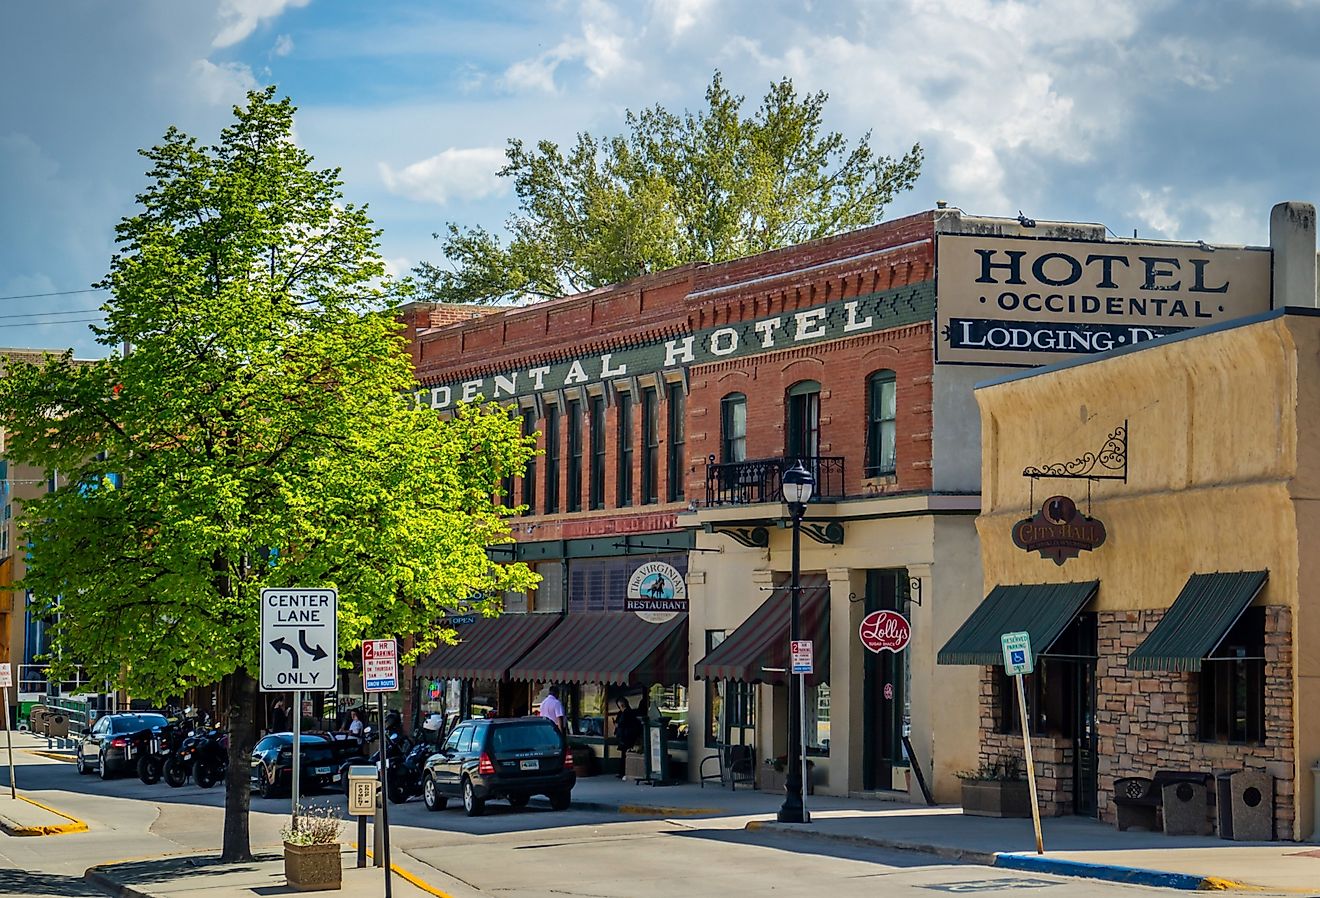 The Occidental Hotel Lodging and Dining along the city street in Buffalo, Wyoming. Image credit Cheri Alguire via Shutterstock.